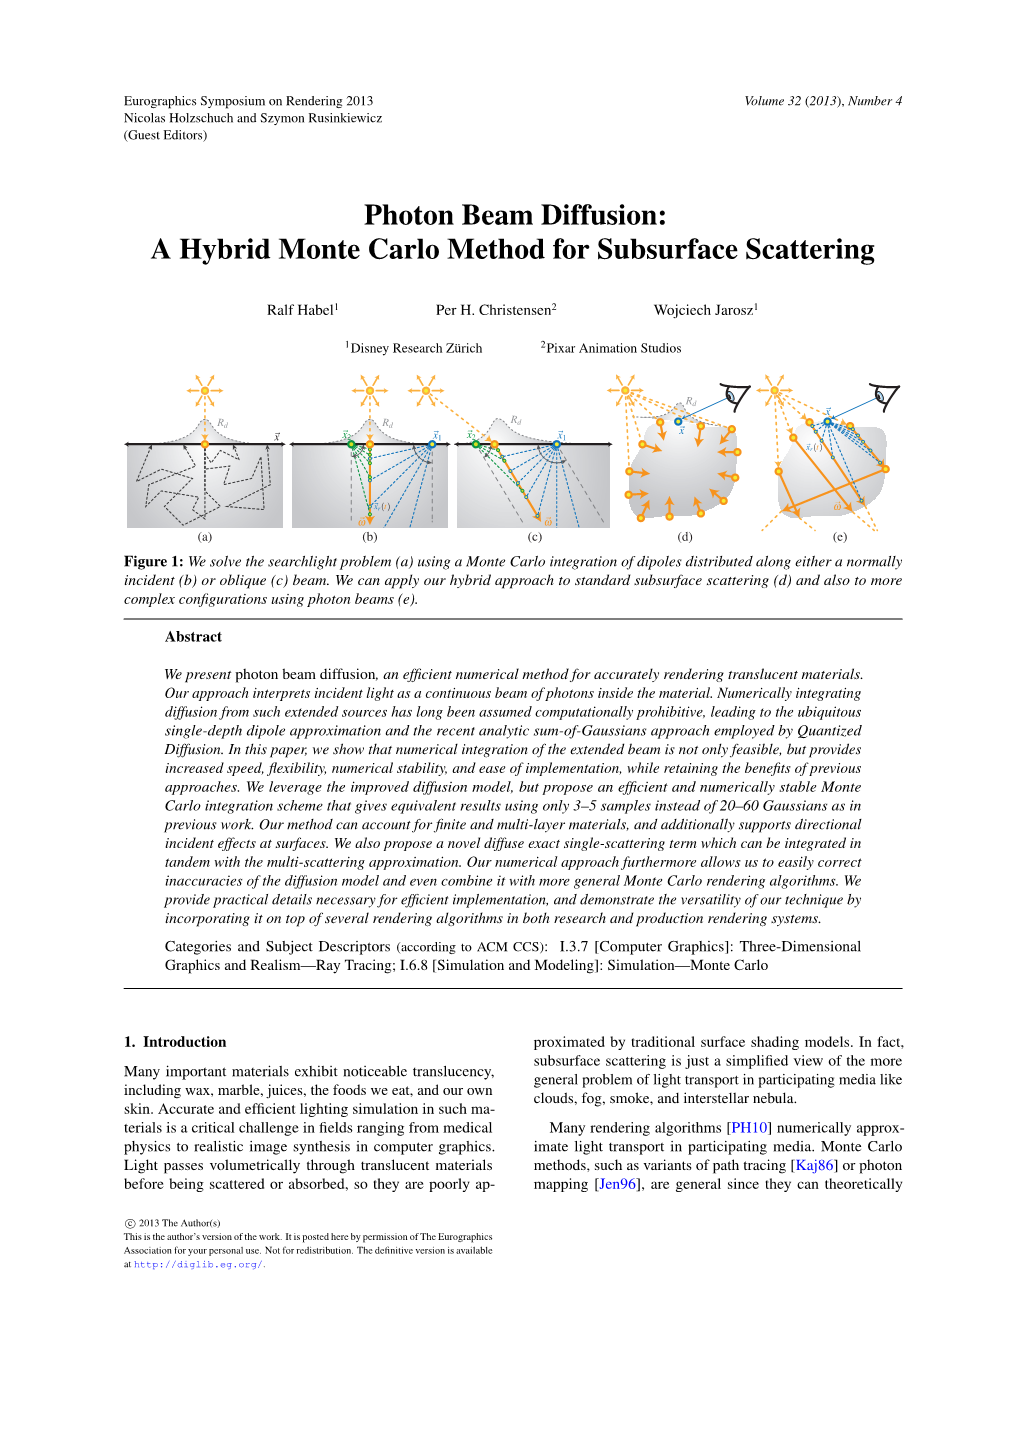 Photon Beam Diffusion: a Hybrid Monte Carlo Method for Subsurface Scattering